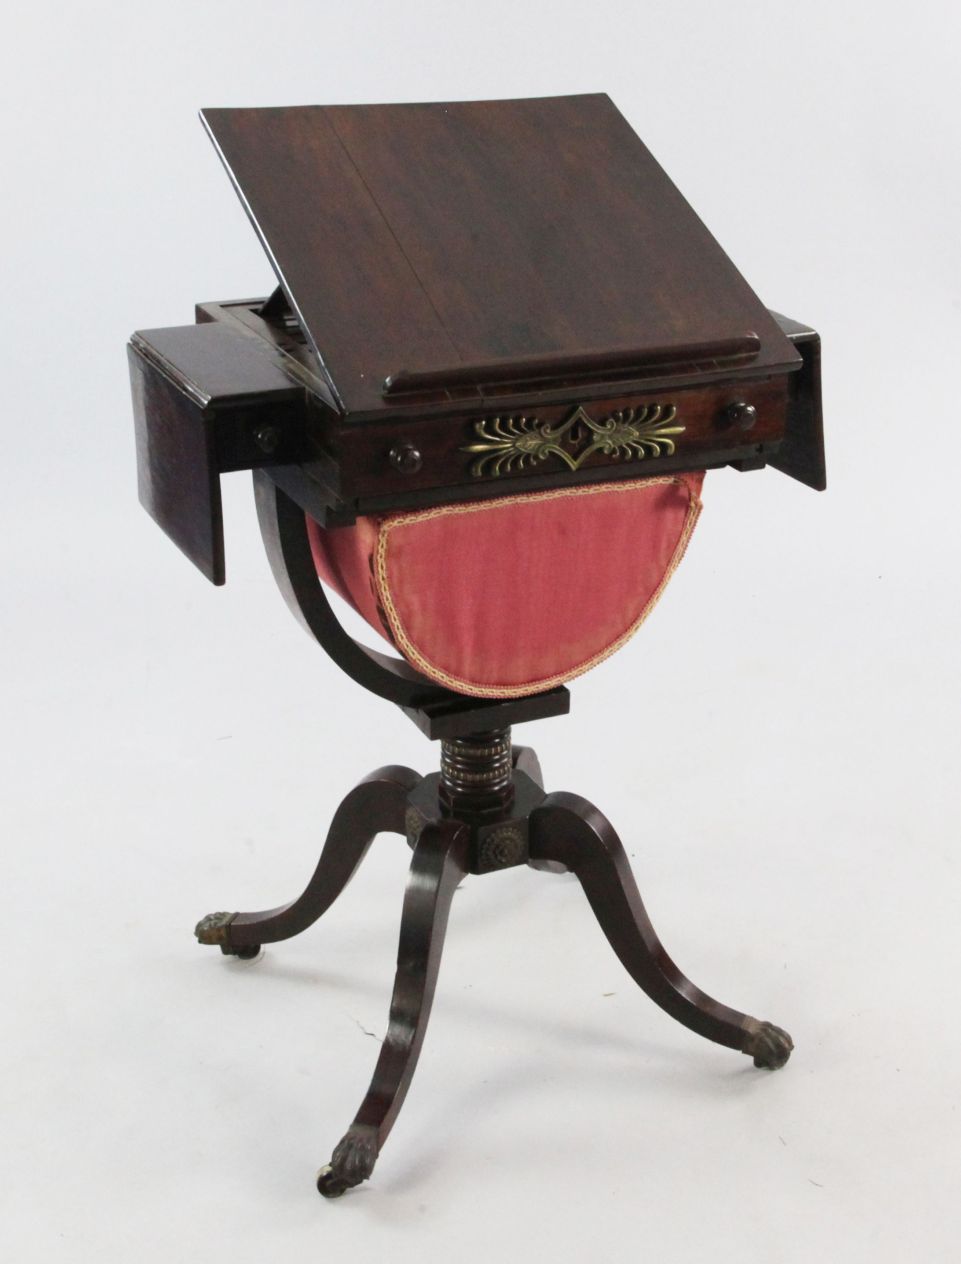 An early 19th century rosewood games / work table, the sliding hinged top revealing a backgammon